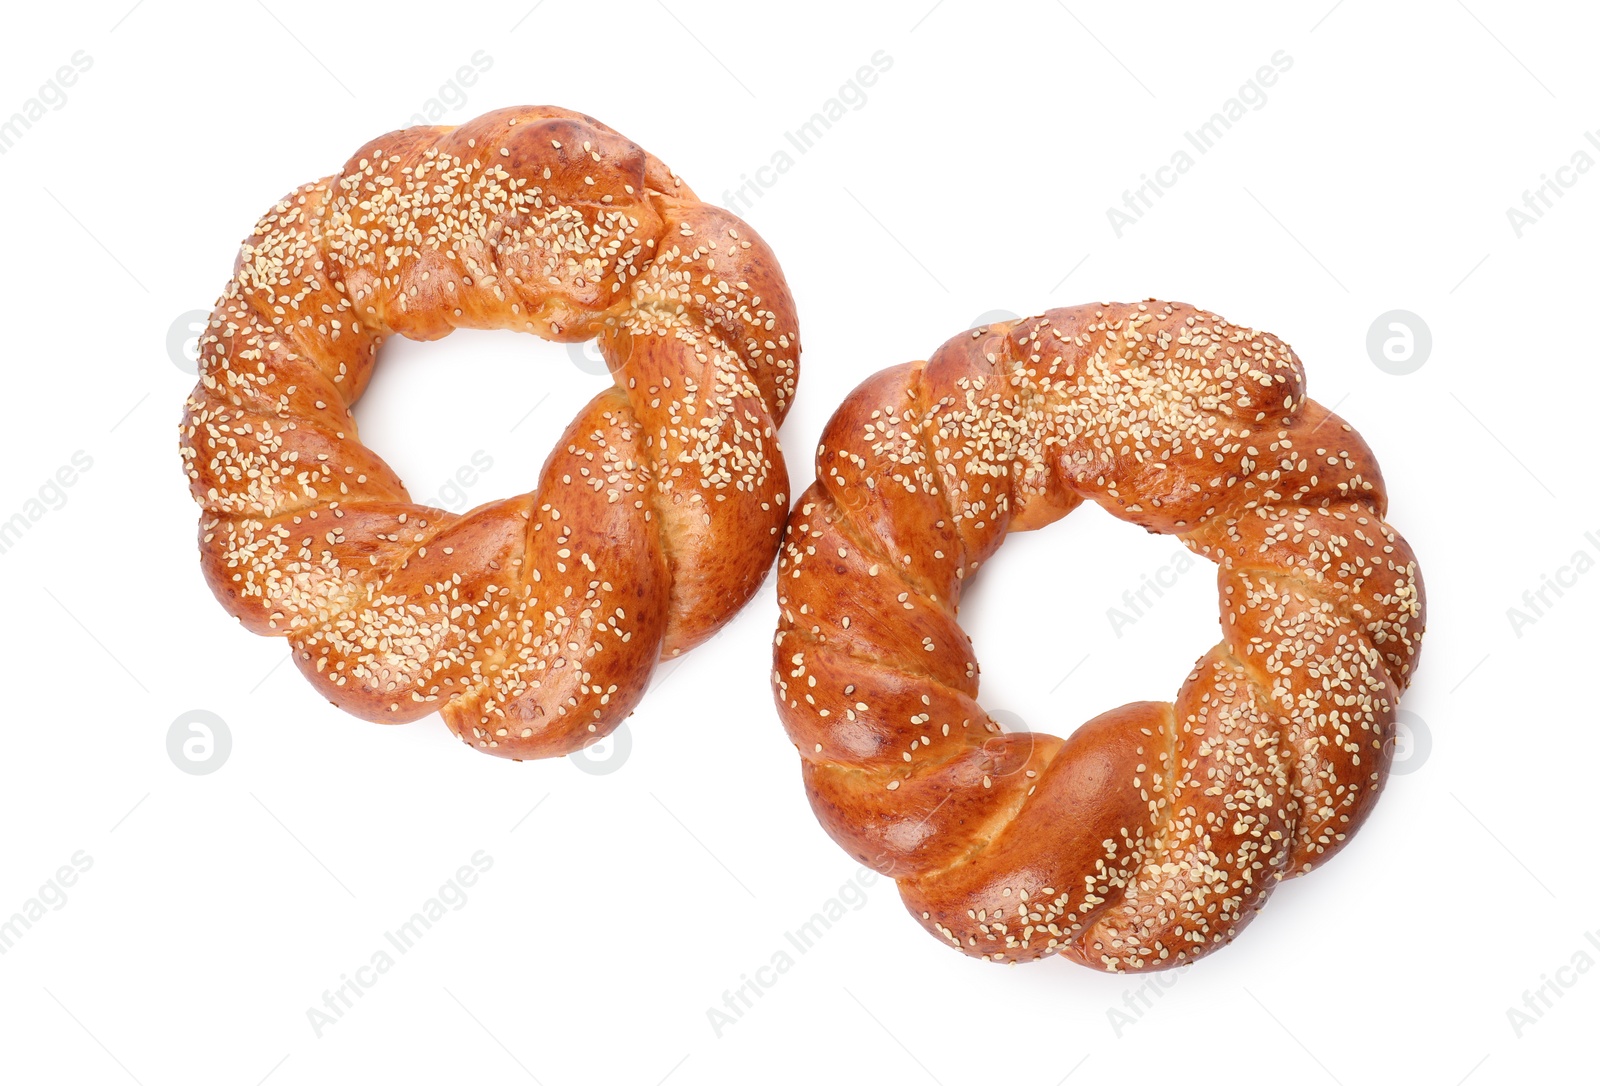 Photo of Round braided breads isolated on white, top view. Fresh pastries